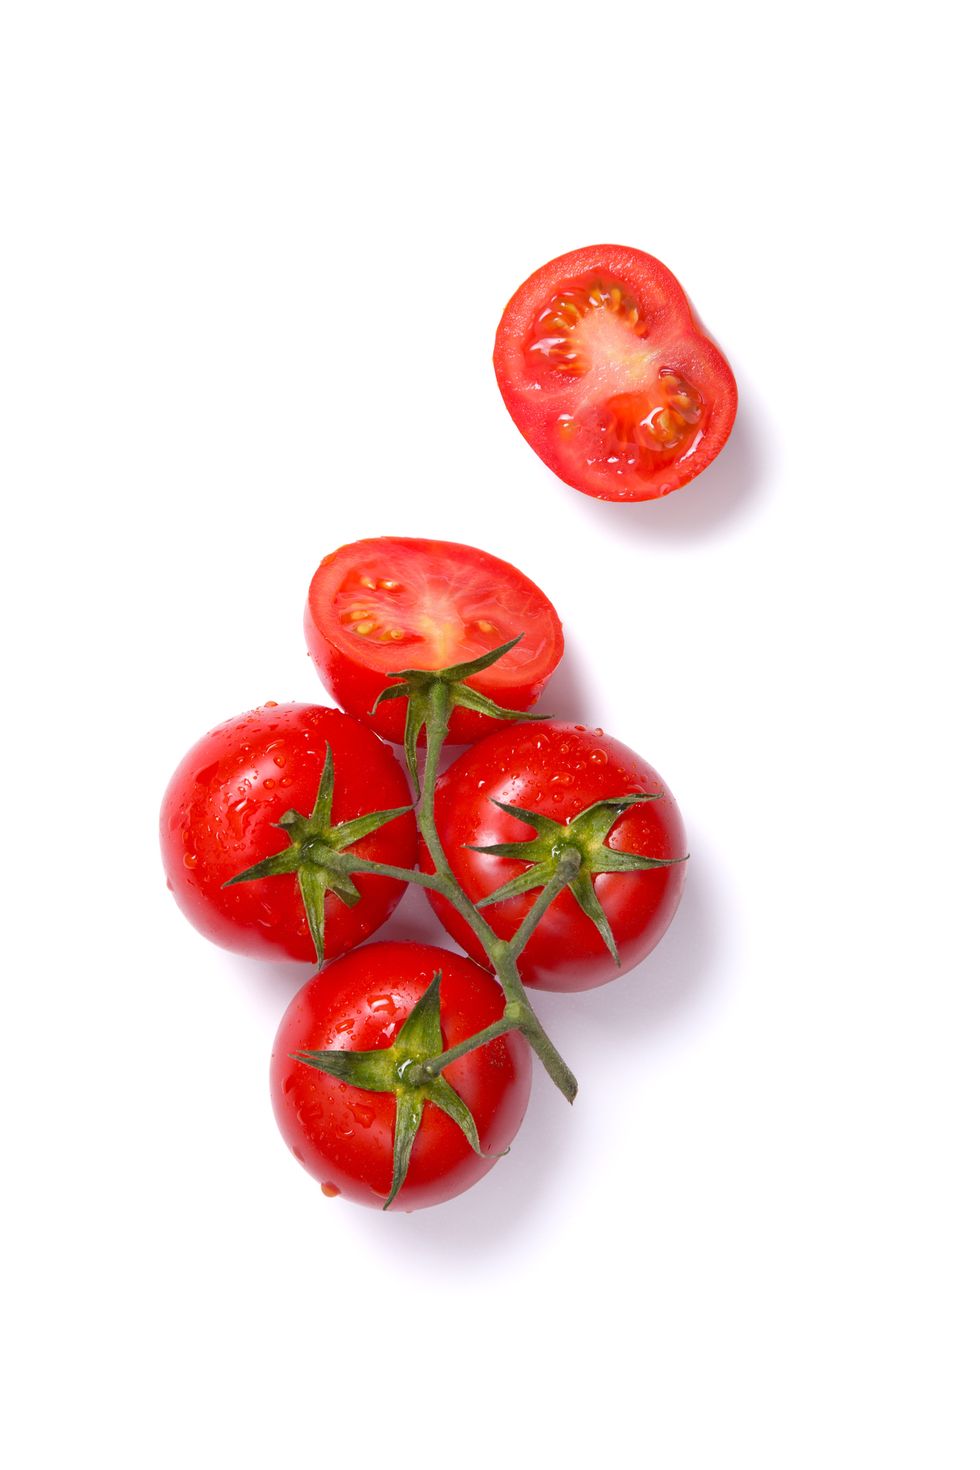 Natural foods, Fruit, Solanum, Tomato, Red, Food, Plant, Plum tomato, Vegetable, Cherry Tomatoes, 